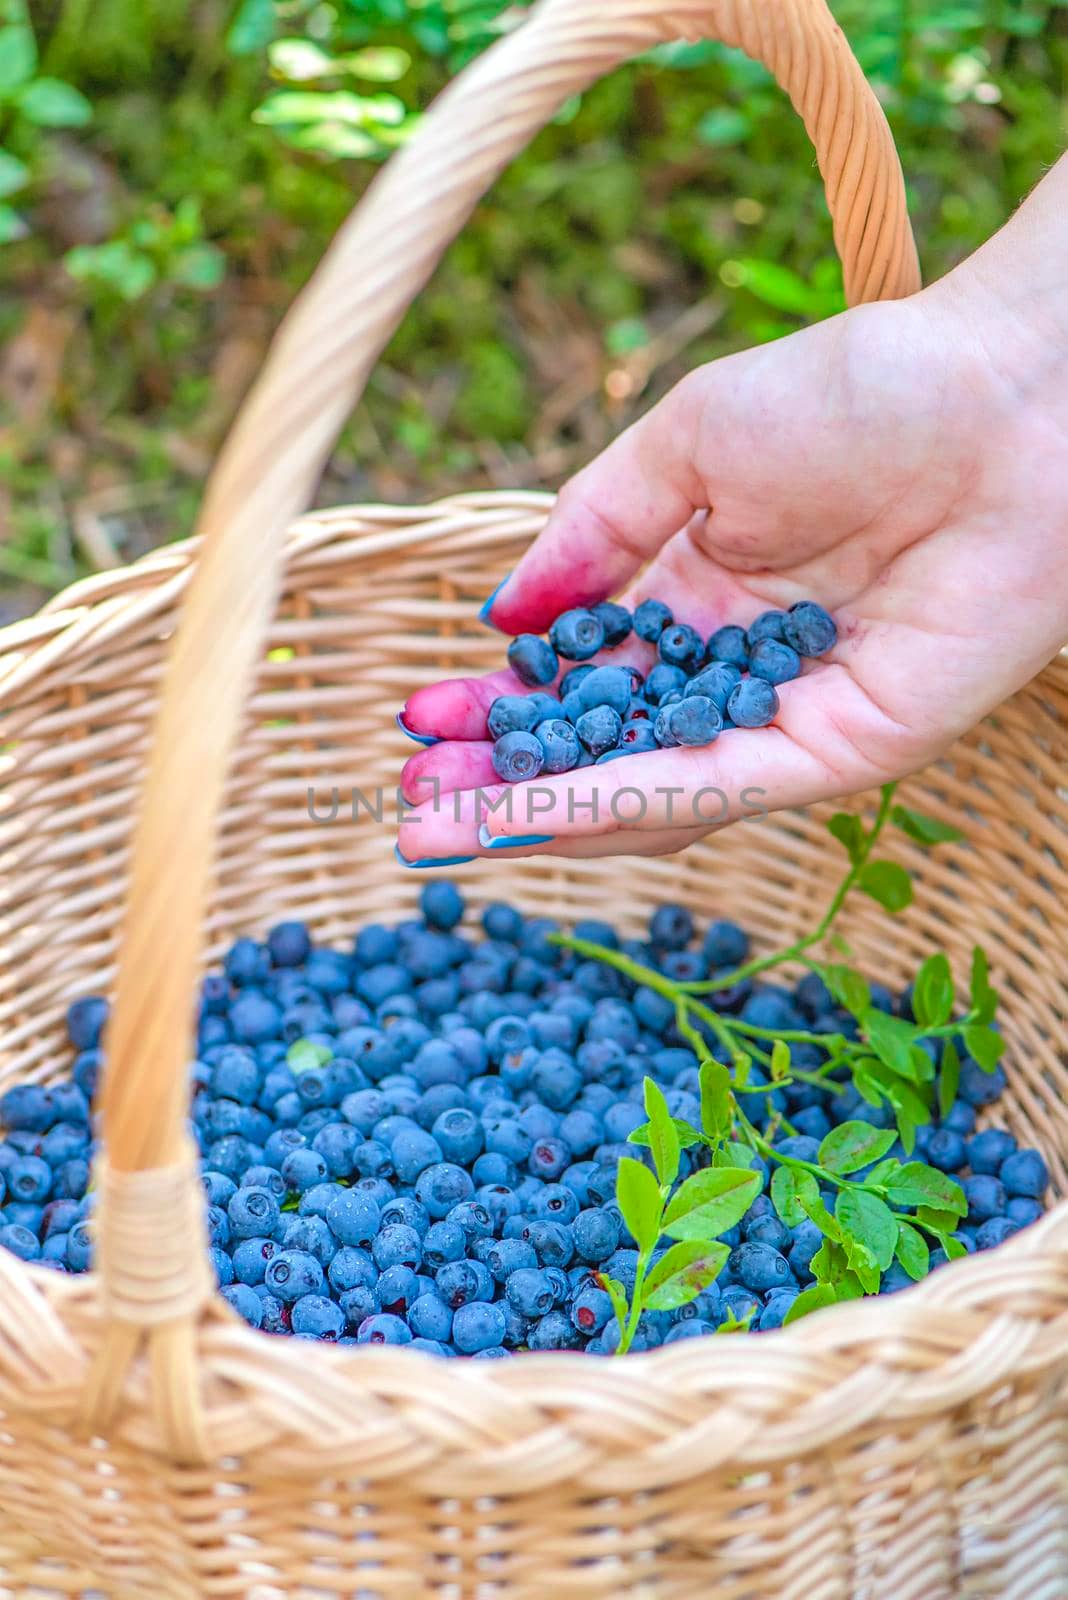 Berry season. Ripe blueberries in a basket. The process of finding and collecting blueberries in the forest during the ripening period. Hand pouring harvested blueberries into a basket.